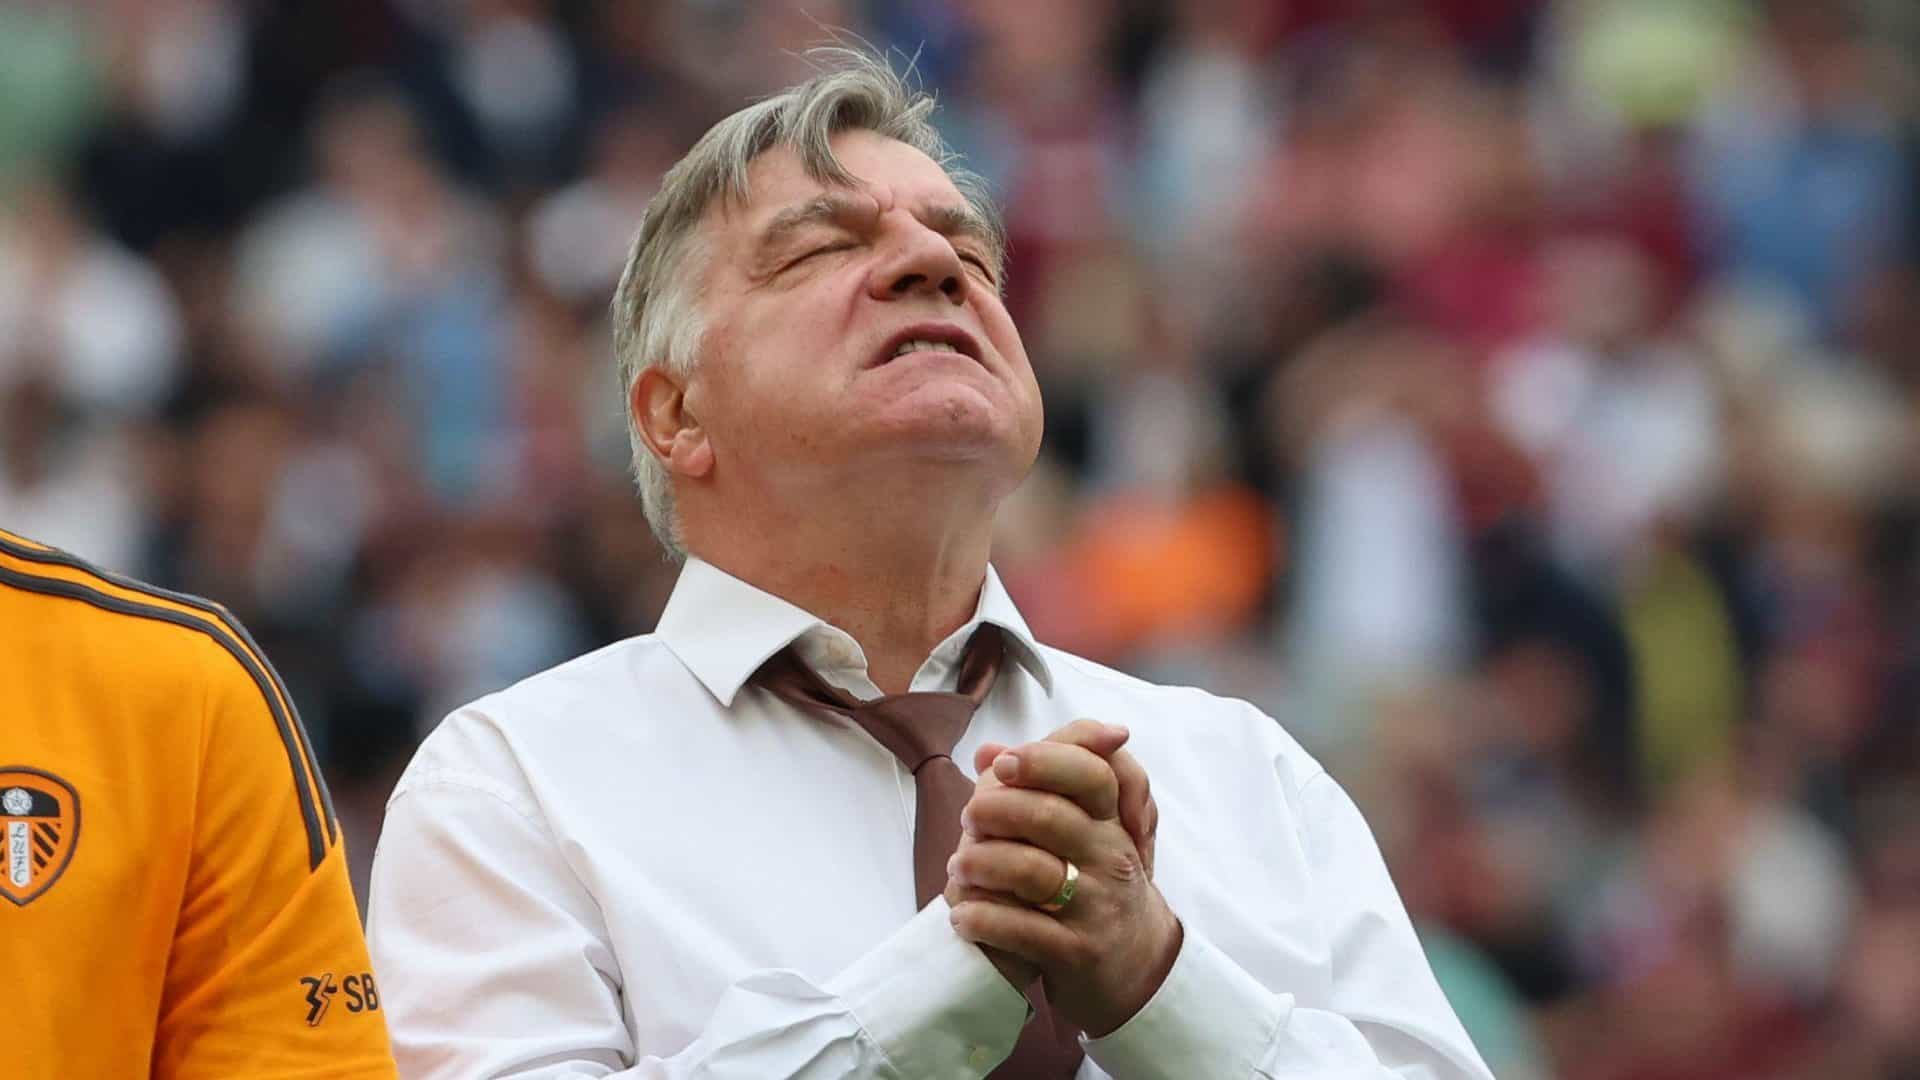 Sam Allardyce after Leeds vs West Ham, miming praying in front of the fans